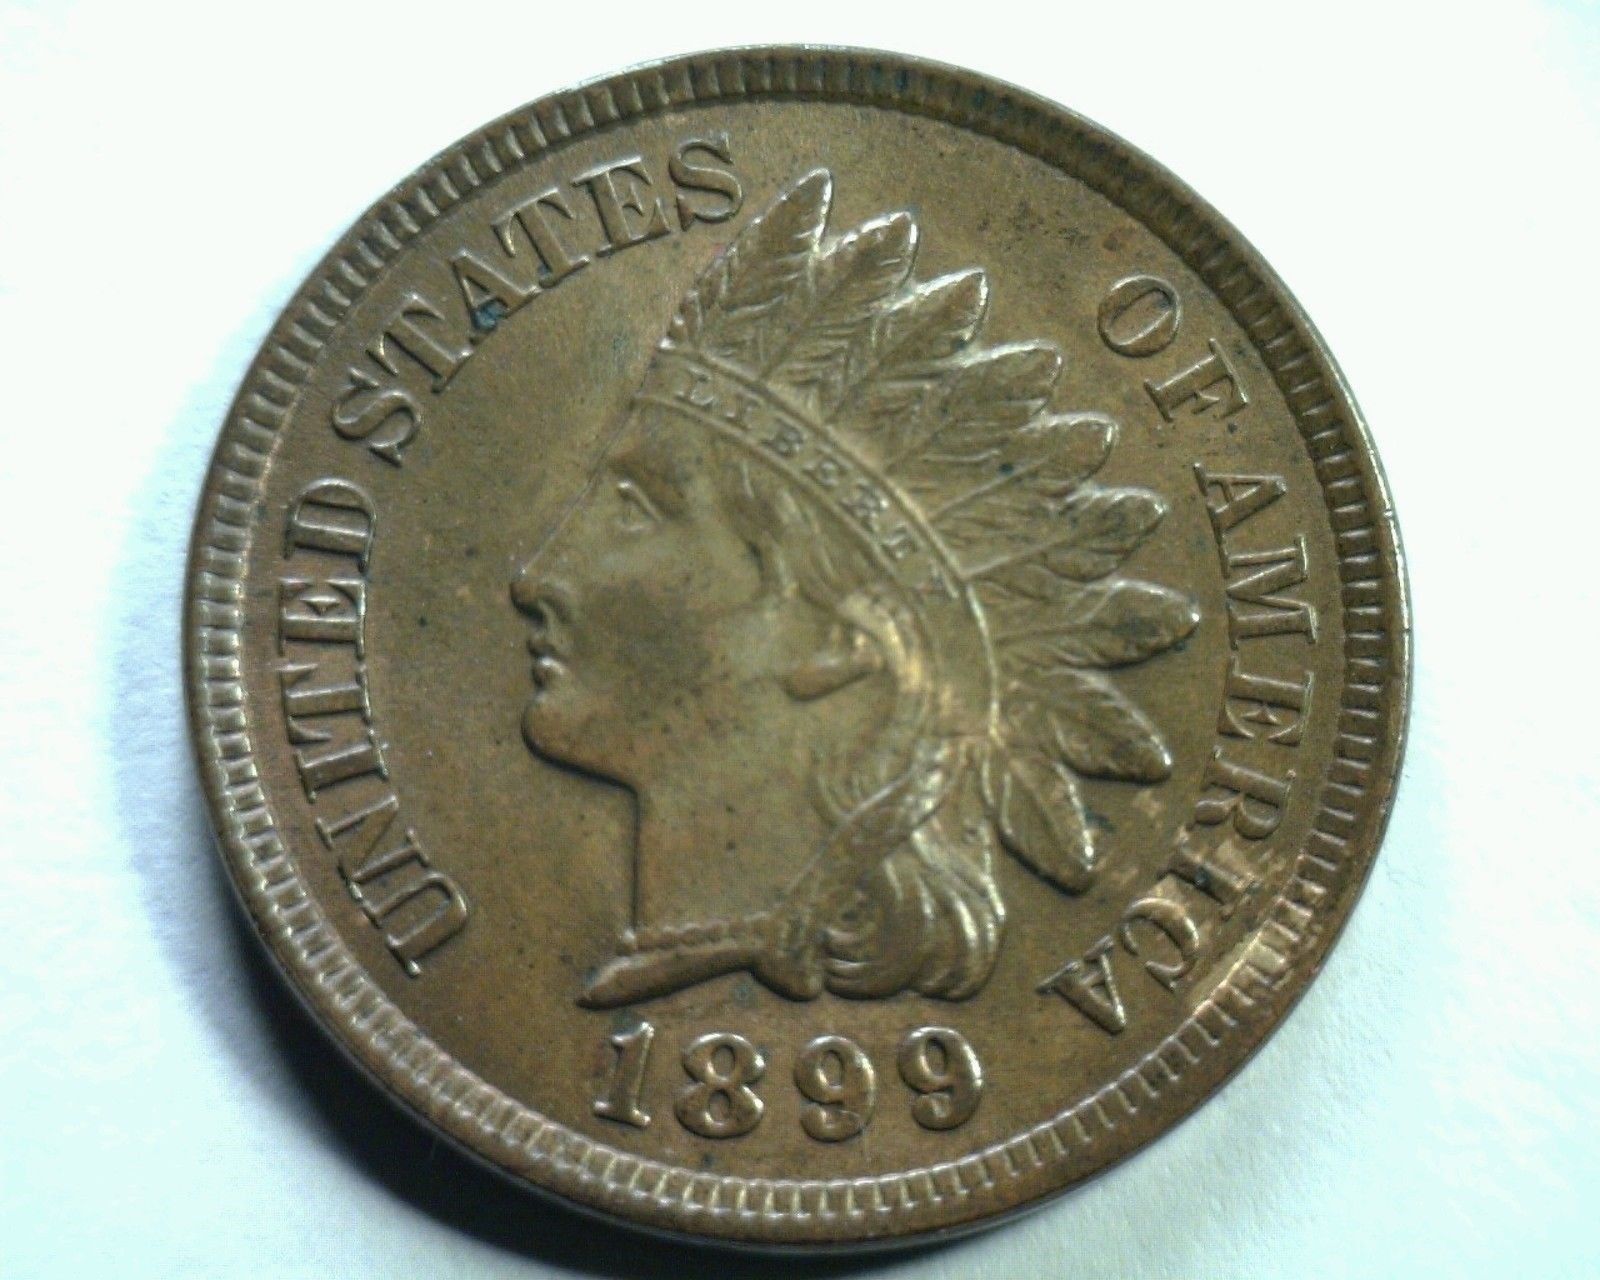 Primary image for 1899 S30 18/18(s) 9/9(n) INDIAN CENT PENNY UNCIRCULATED OLD CLEANING NOW RETONED